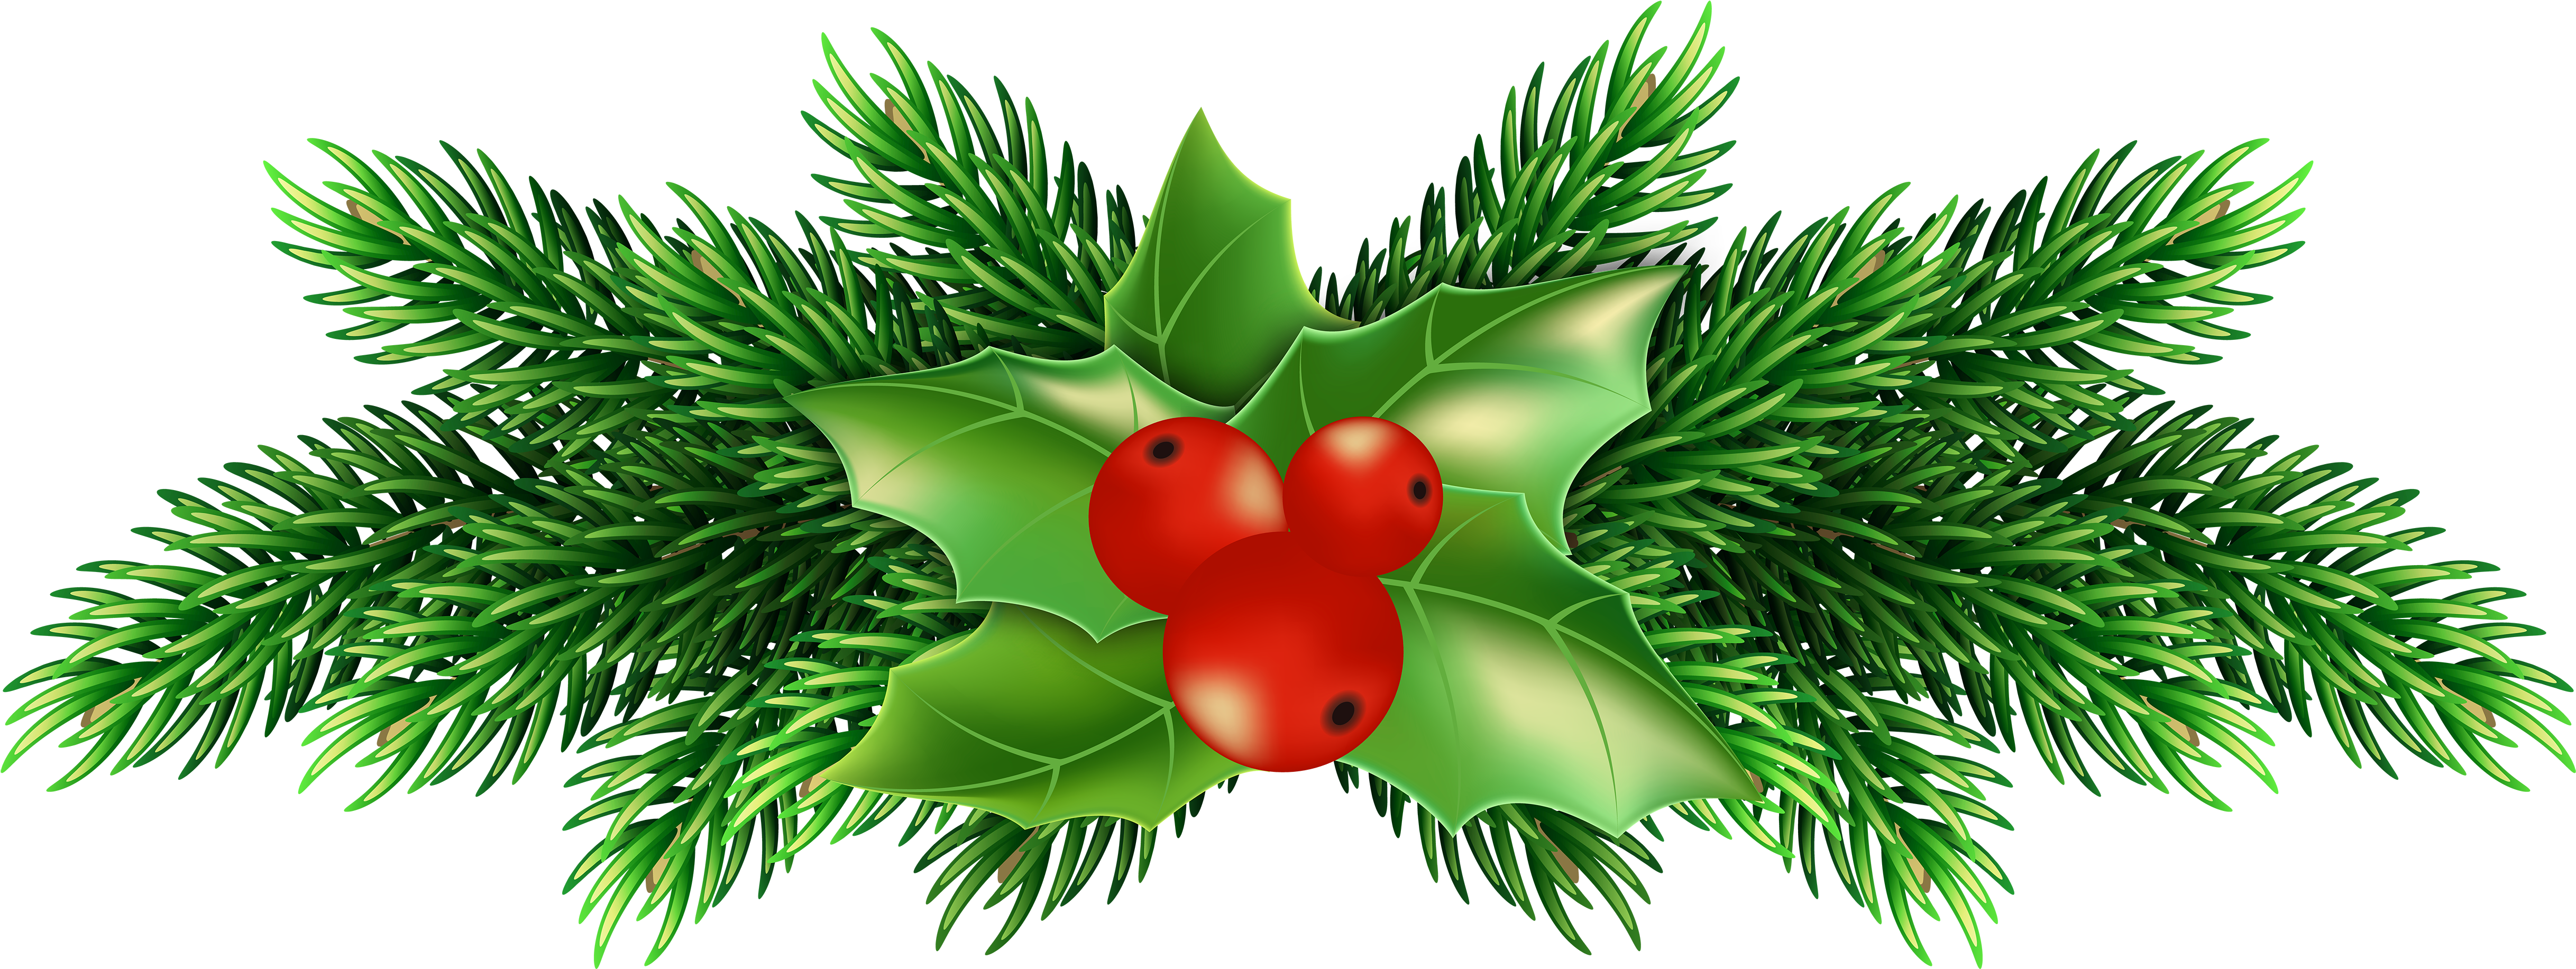 70-703713 christmas-holly-png